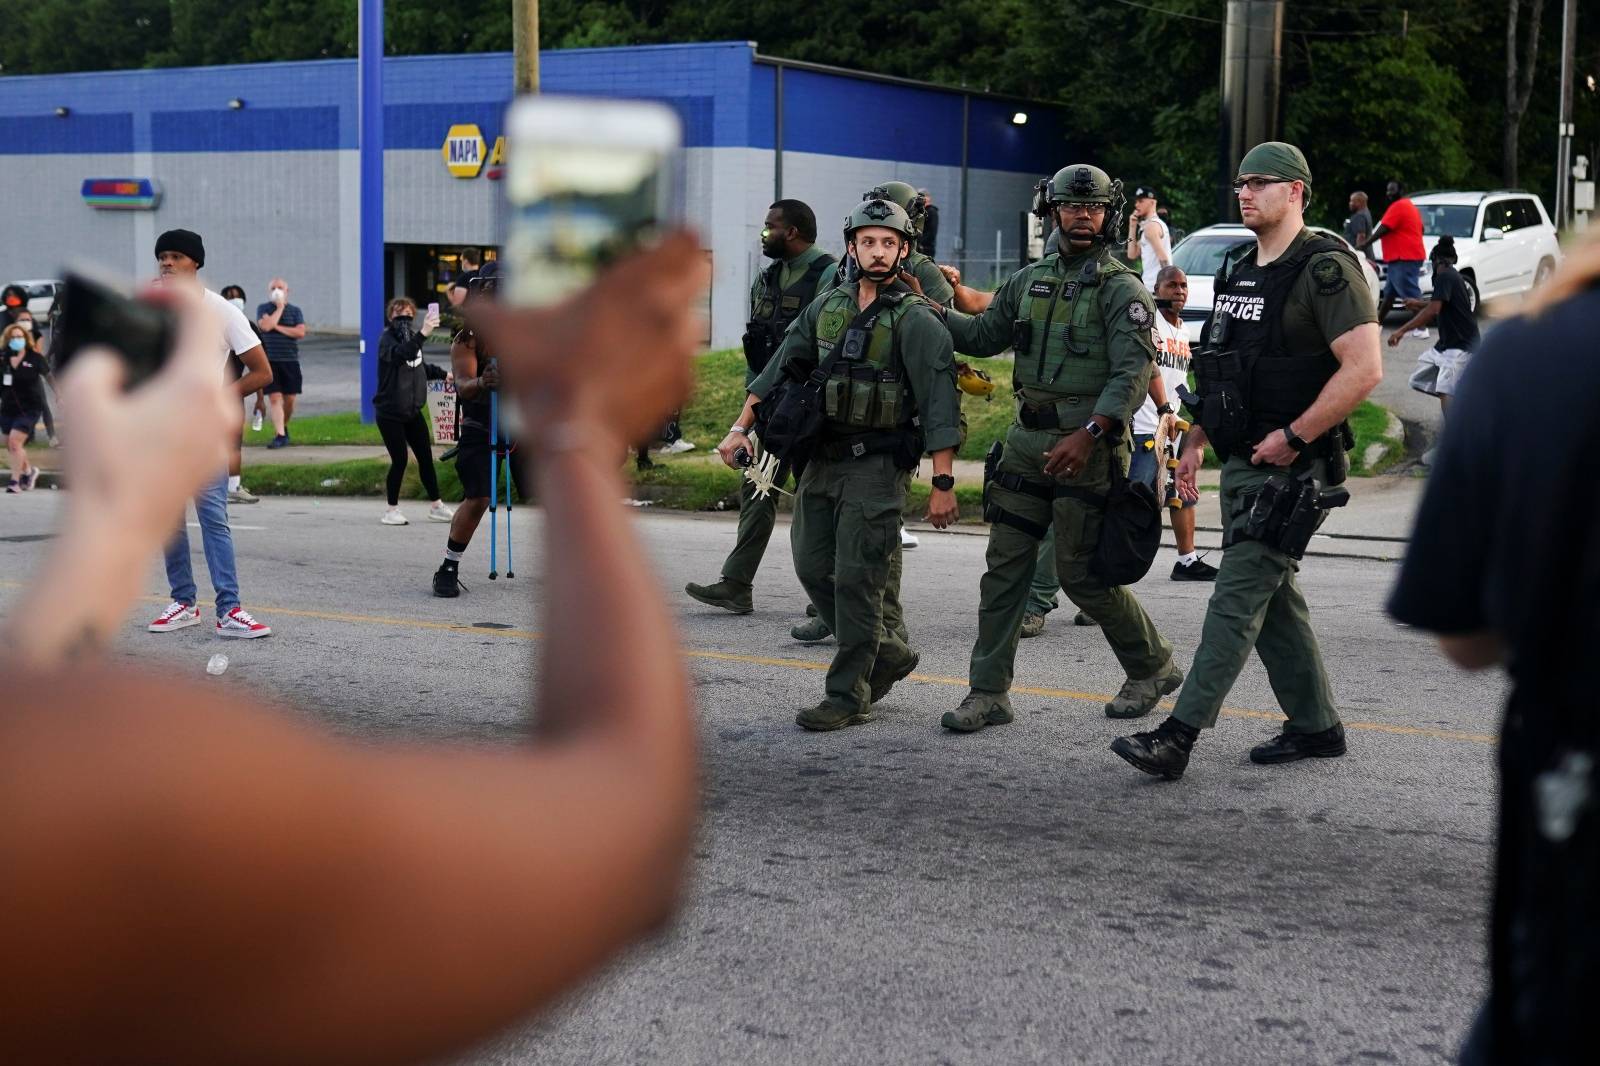 Protesters film police officers as they retreat during a rally against racial inequality and the police shooting death of Rayshard Brooks, in Atlanta